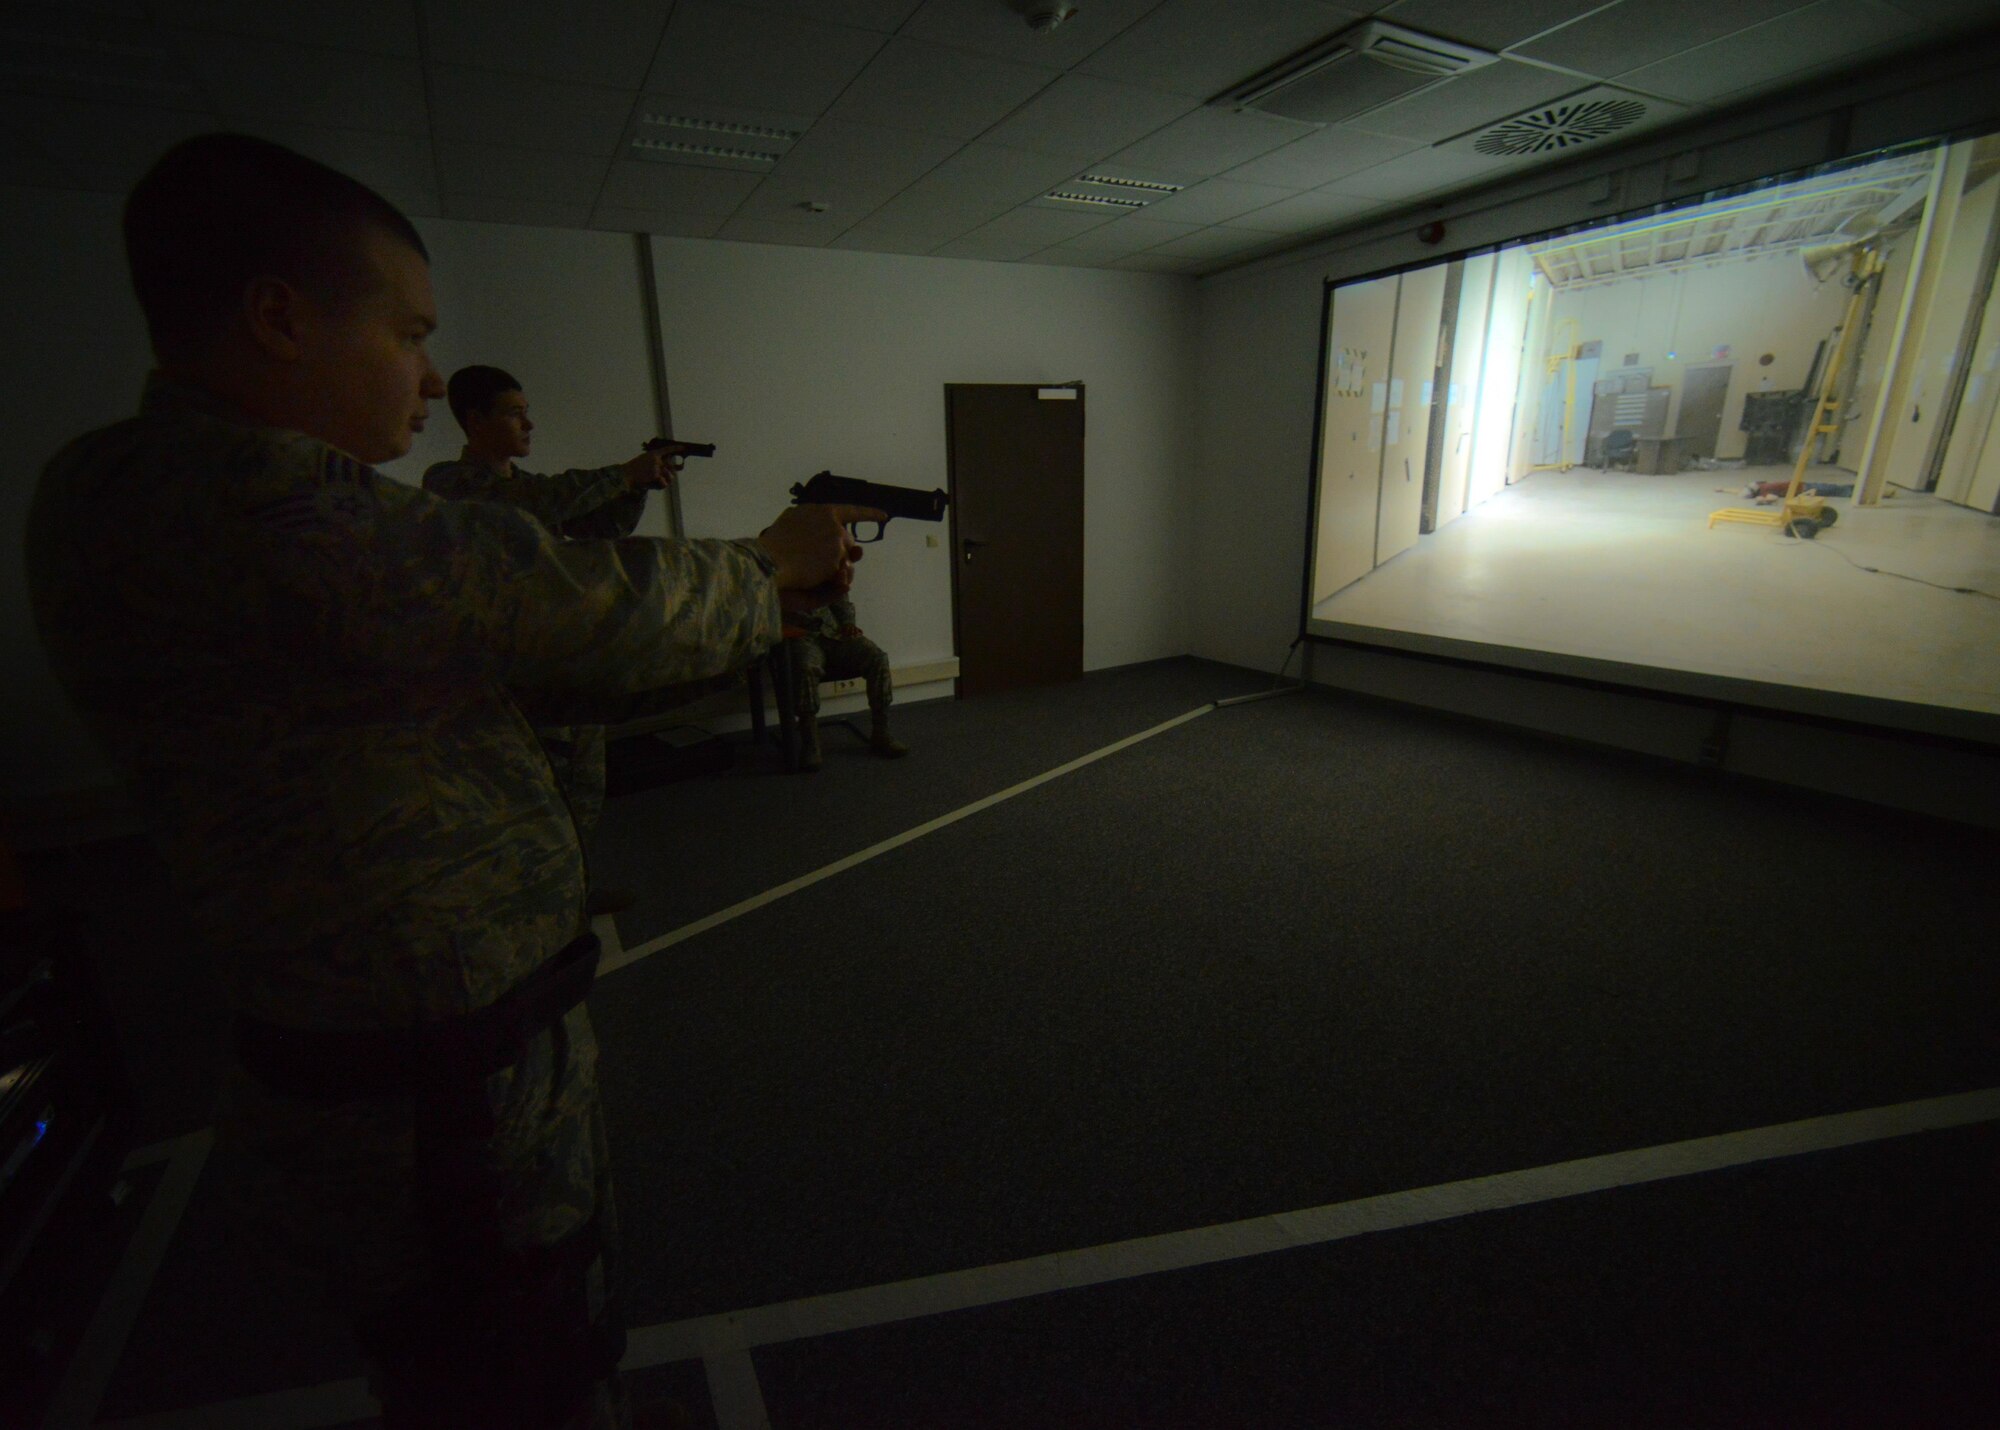 Airmen assigned to the 86th Security Forces Squadron react to a Firearms Training System scenario March 6, 2015, at Ramstein Air Base, Germany. The Air Force-wide system allows law enforcement a virtual experience with the use of laser-pointed, air-compressed weapons on a training system similar to an interactive video game. (U.S. Air Force photo/Senior Airman Nicole Sikorski)